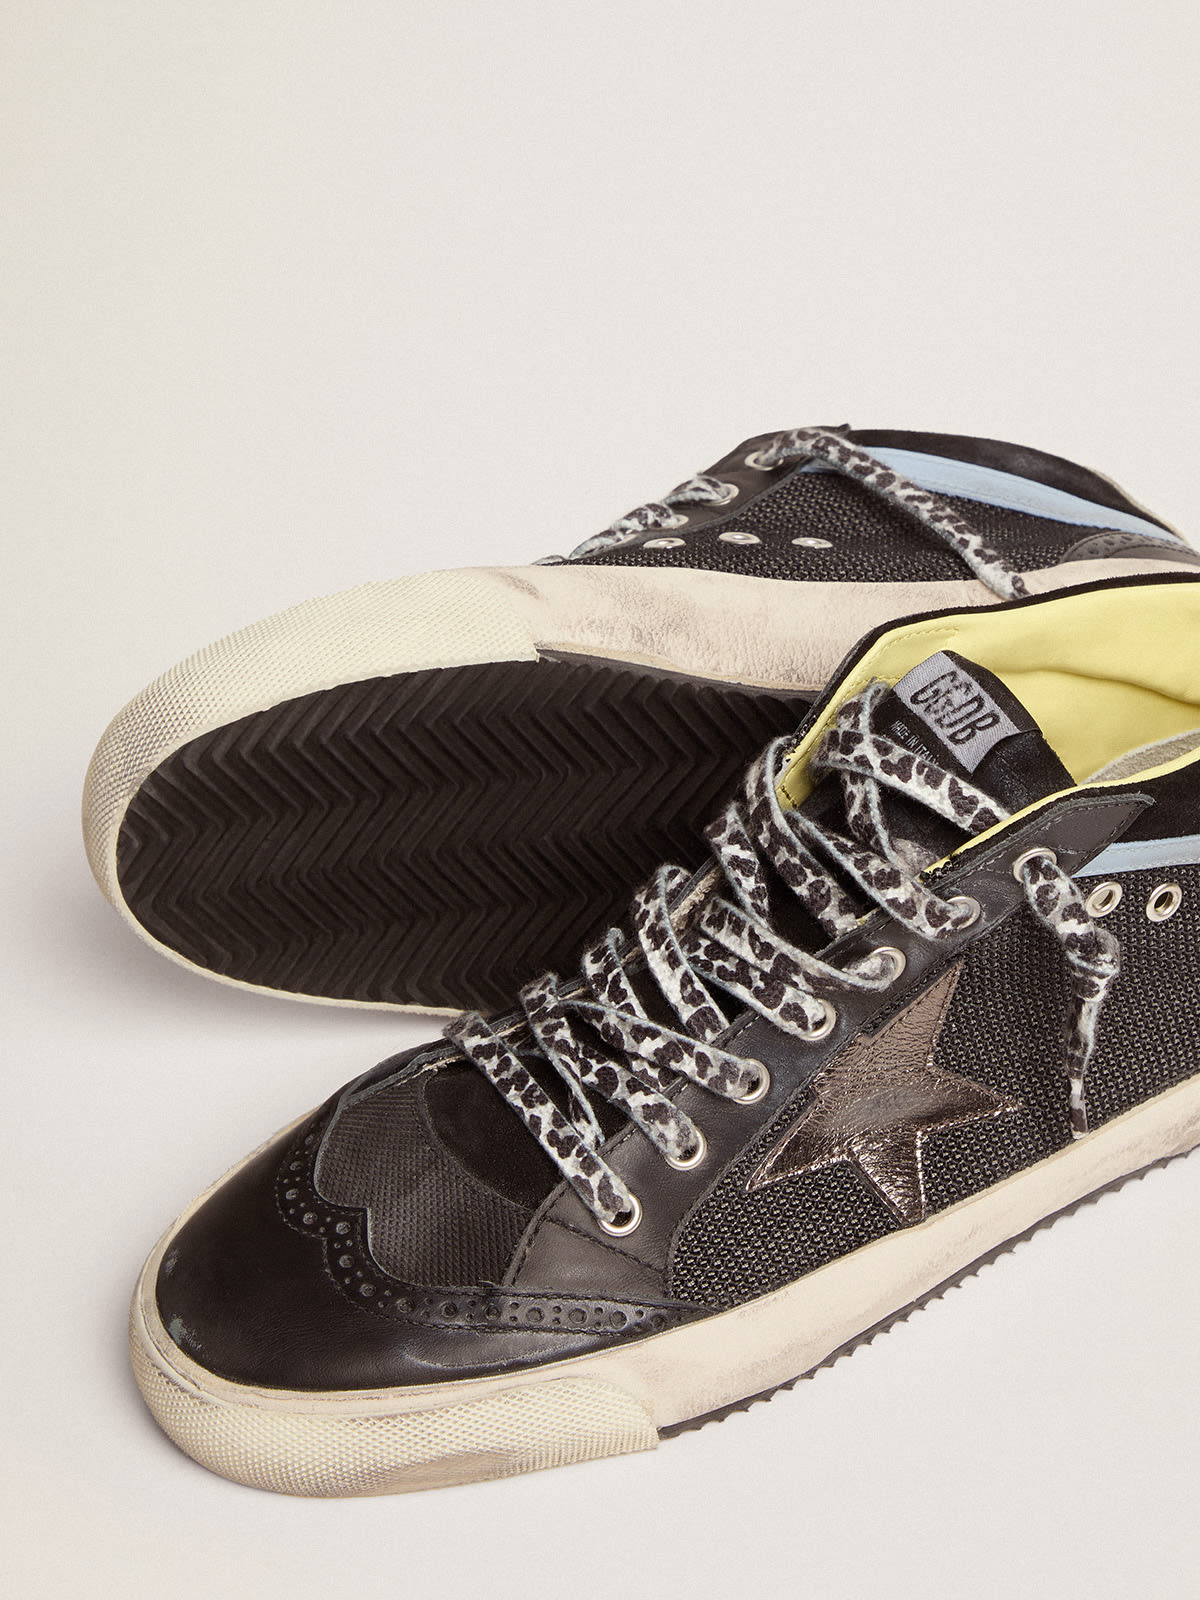 Golden Goose - Men's Mid Star LTD in black mesh and leather with gray star in 